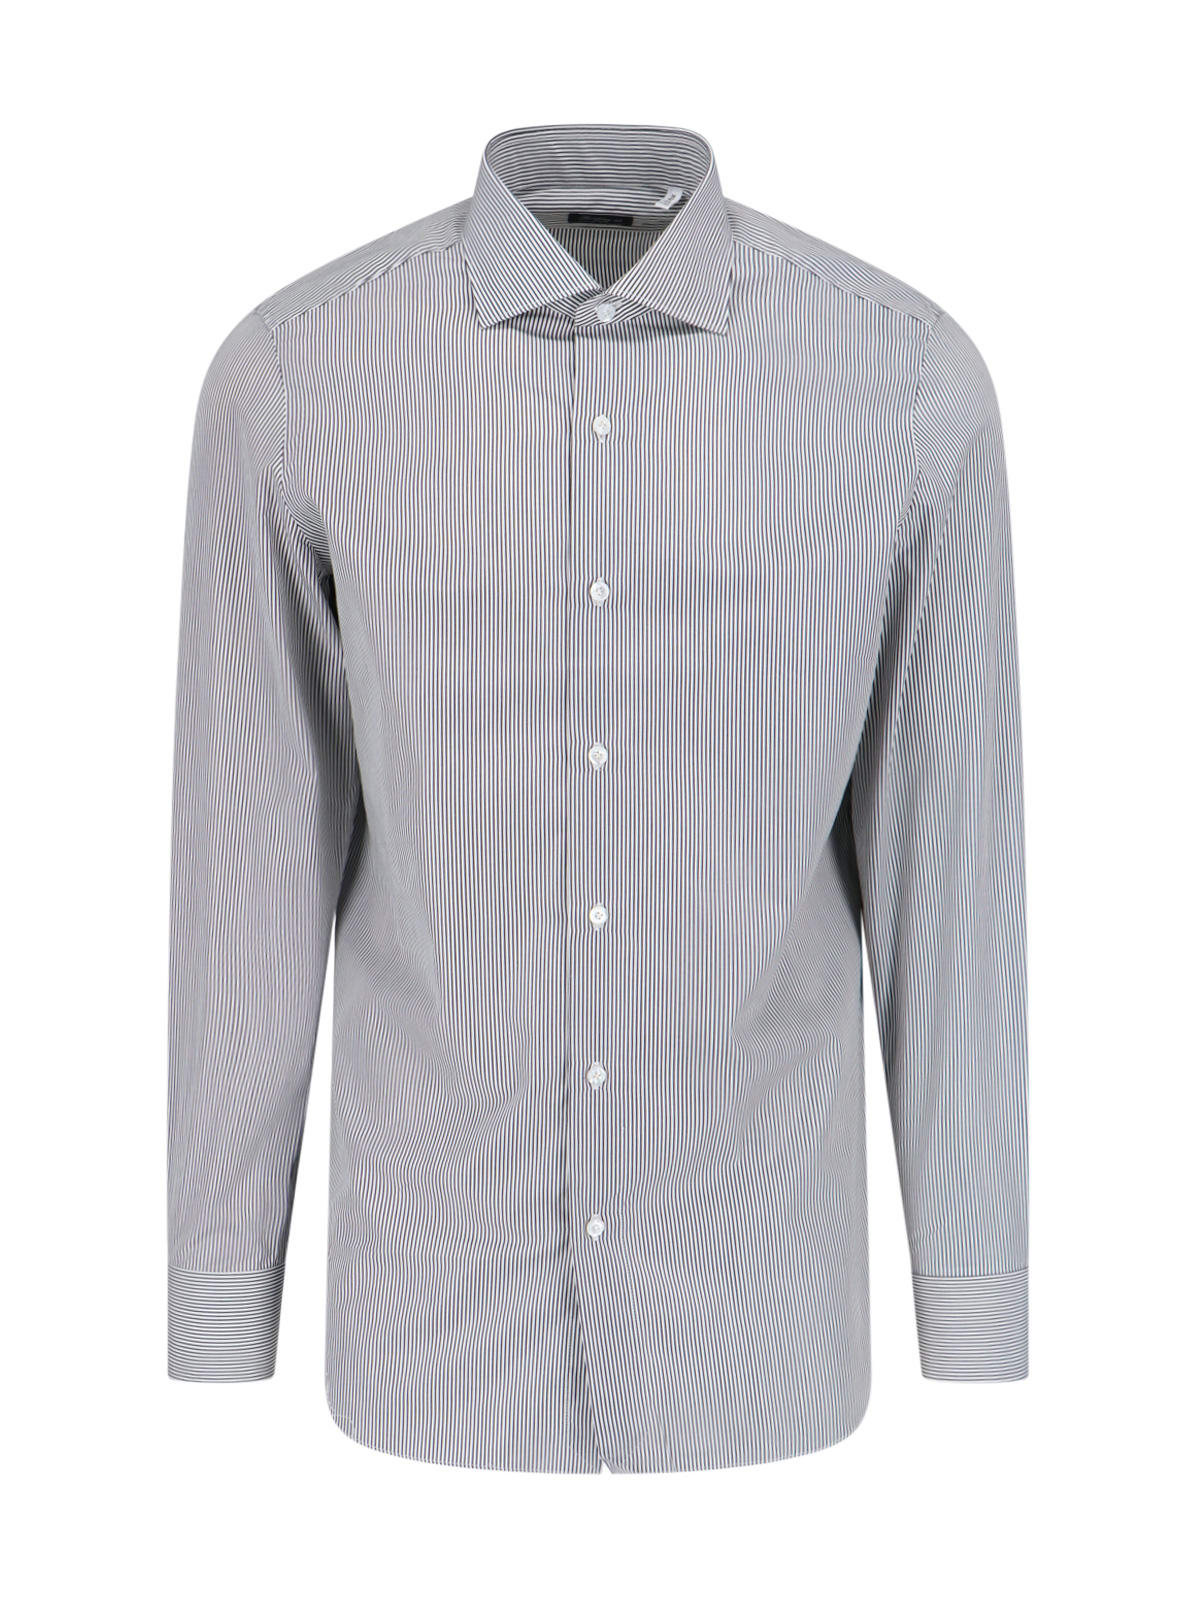 Finamore Striped Shirt In Gray